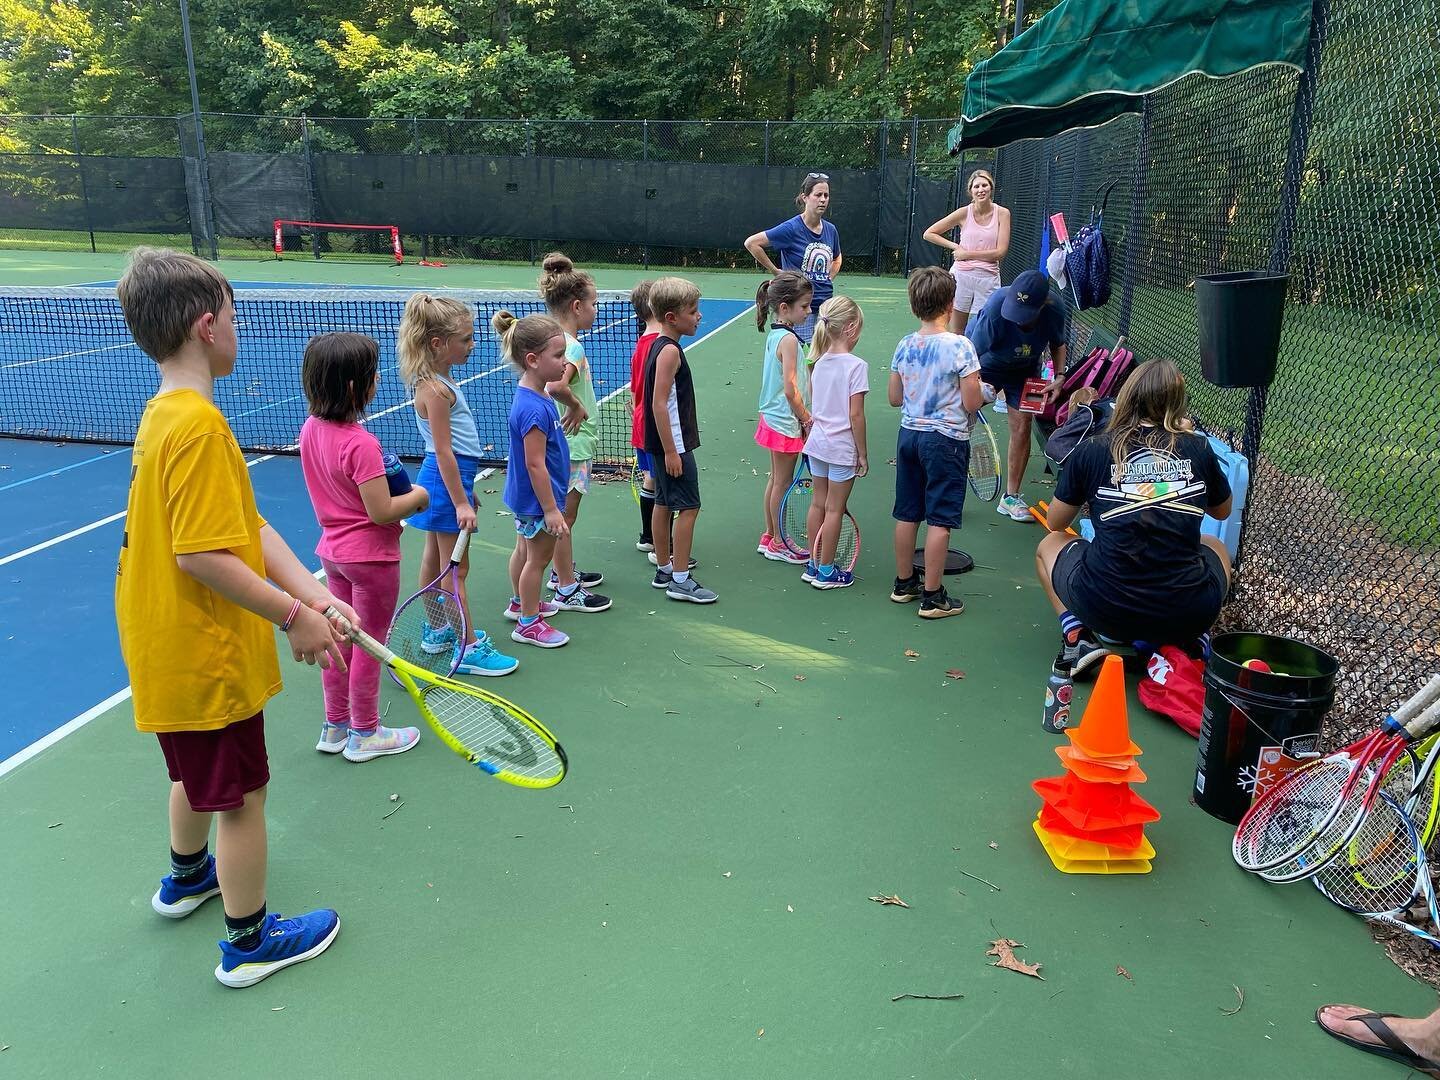 It&rsquo;s that time again! 
.
I scream, you scream, we all scream for ice cream! 🍦 
.
Red ball clinic for tennis beginners aged 4-8! Click is will be held 9/6 and 9/13 from 5-6pm at the Tanglewood hard courts! 
.
Tennis match play Tuesday is for ou